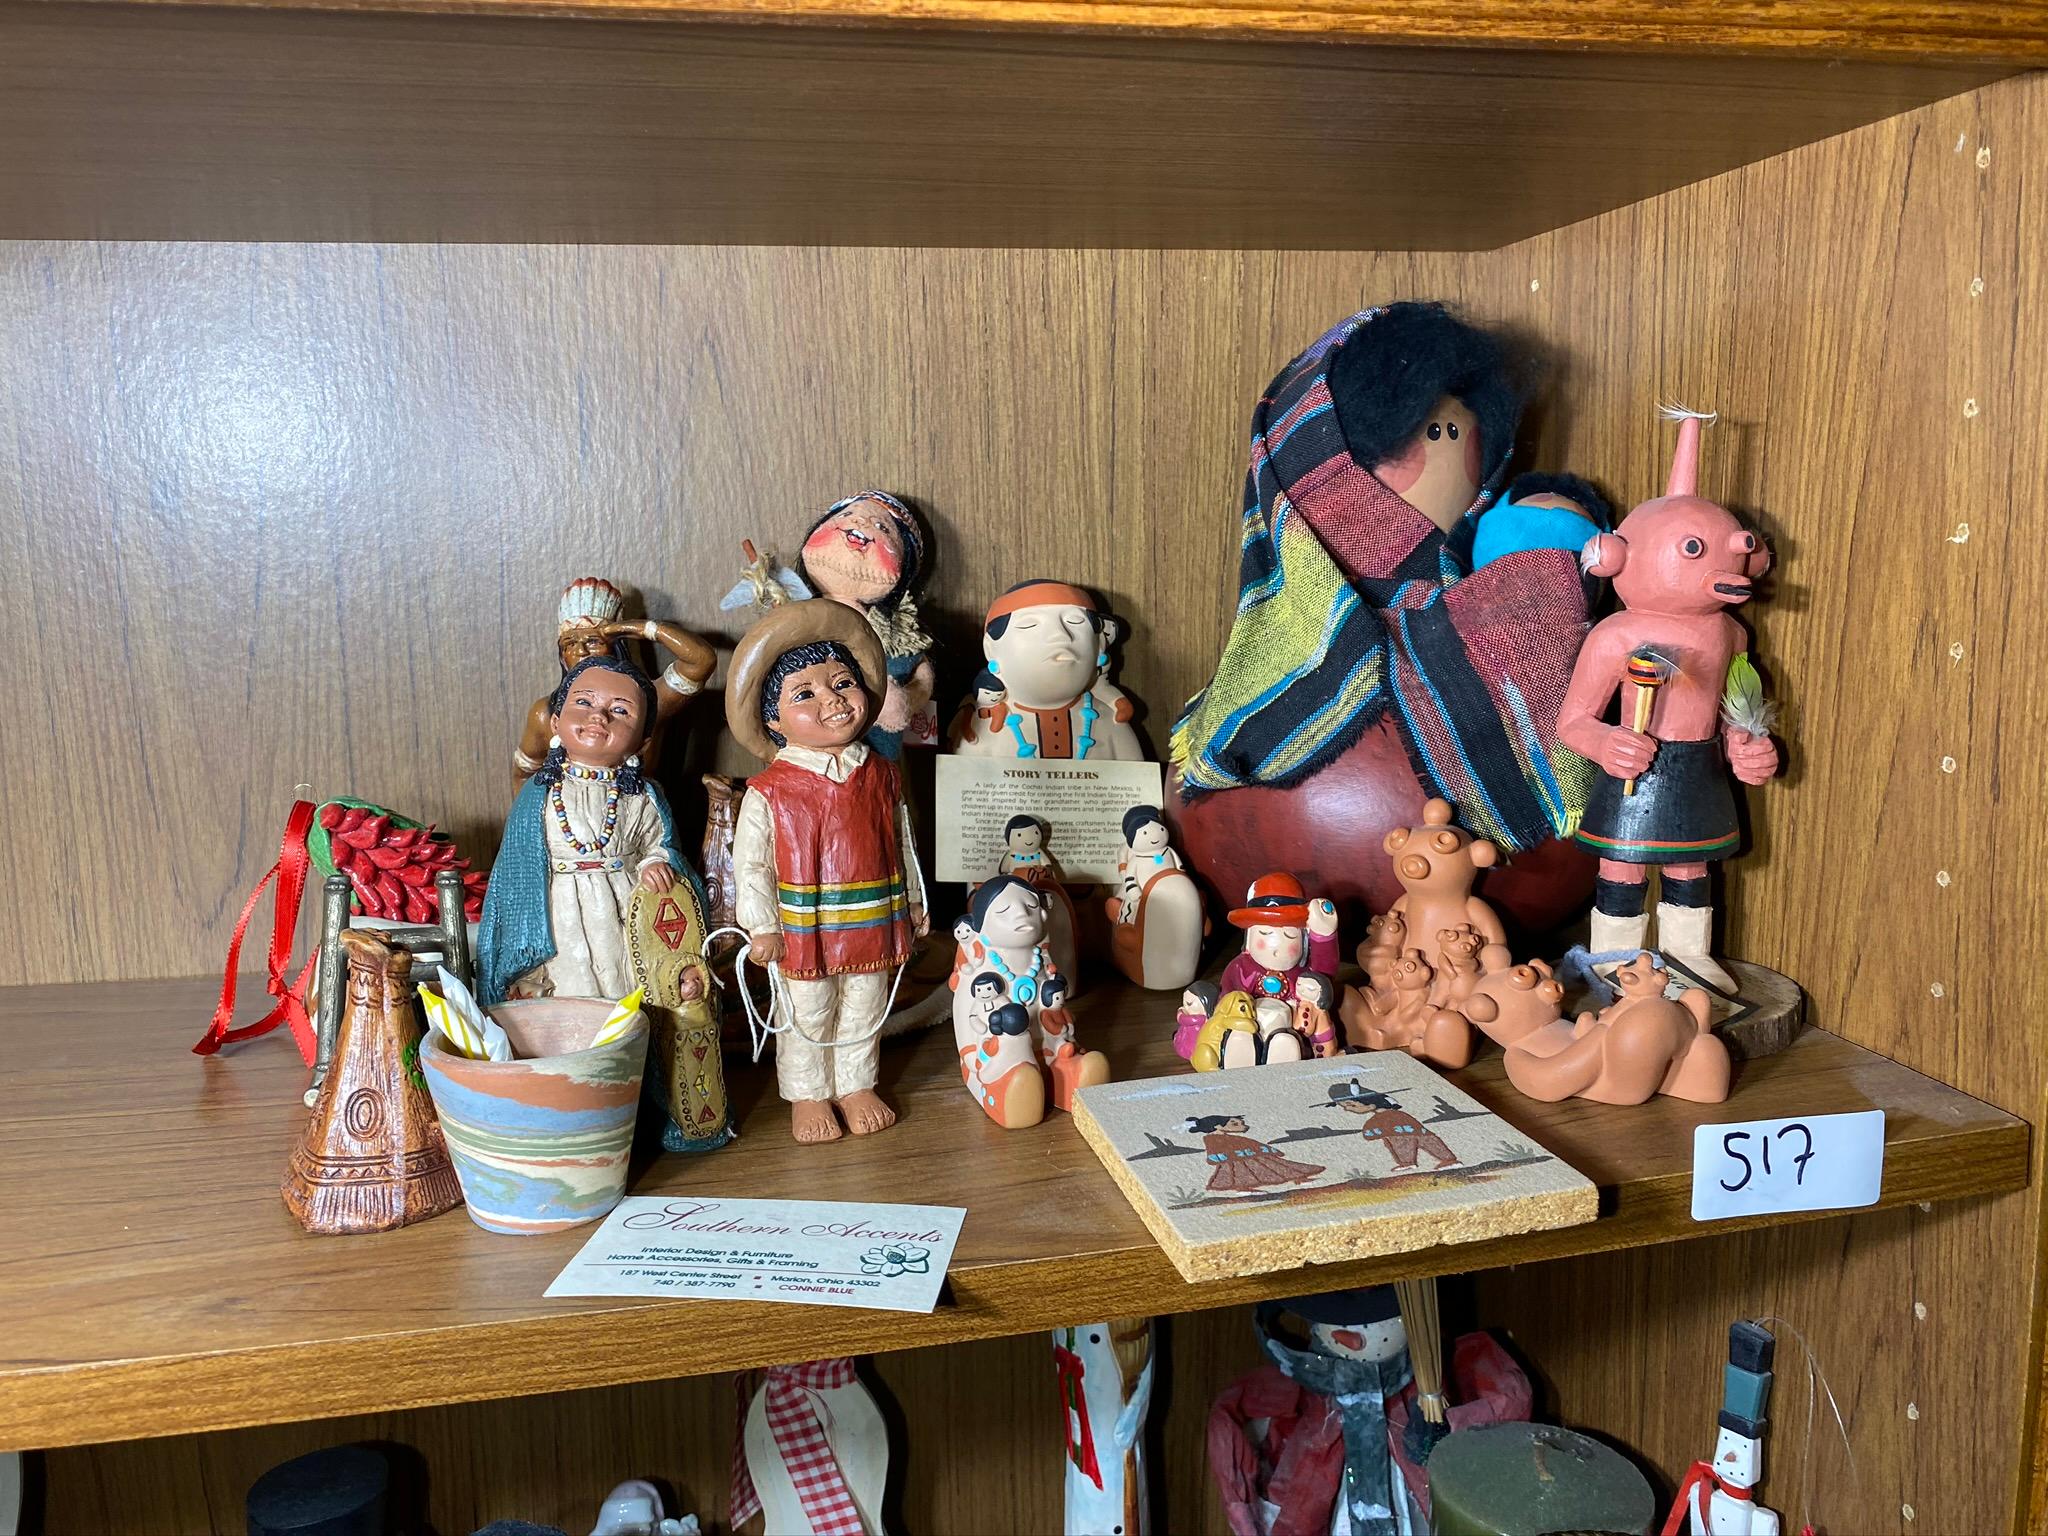 Group lot of Native American themed figurines